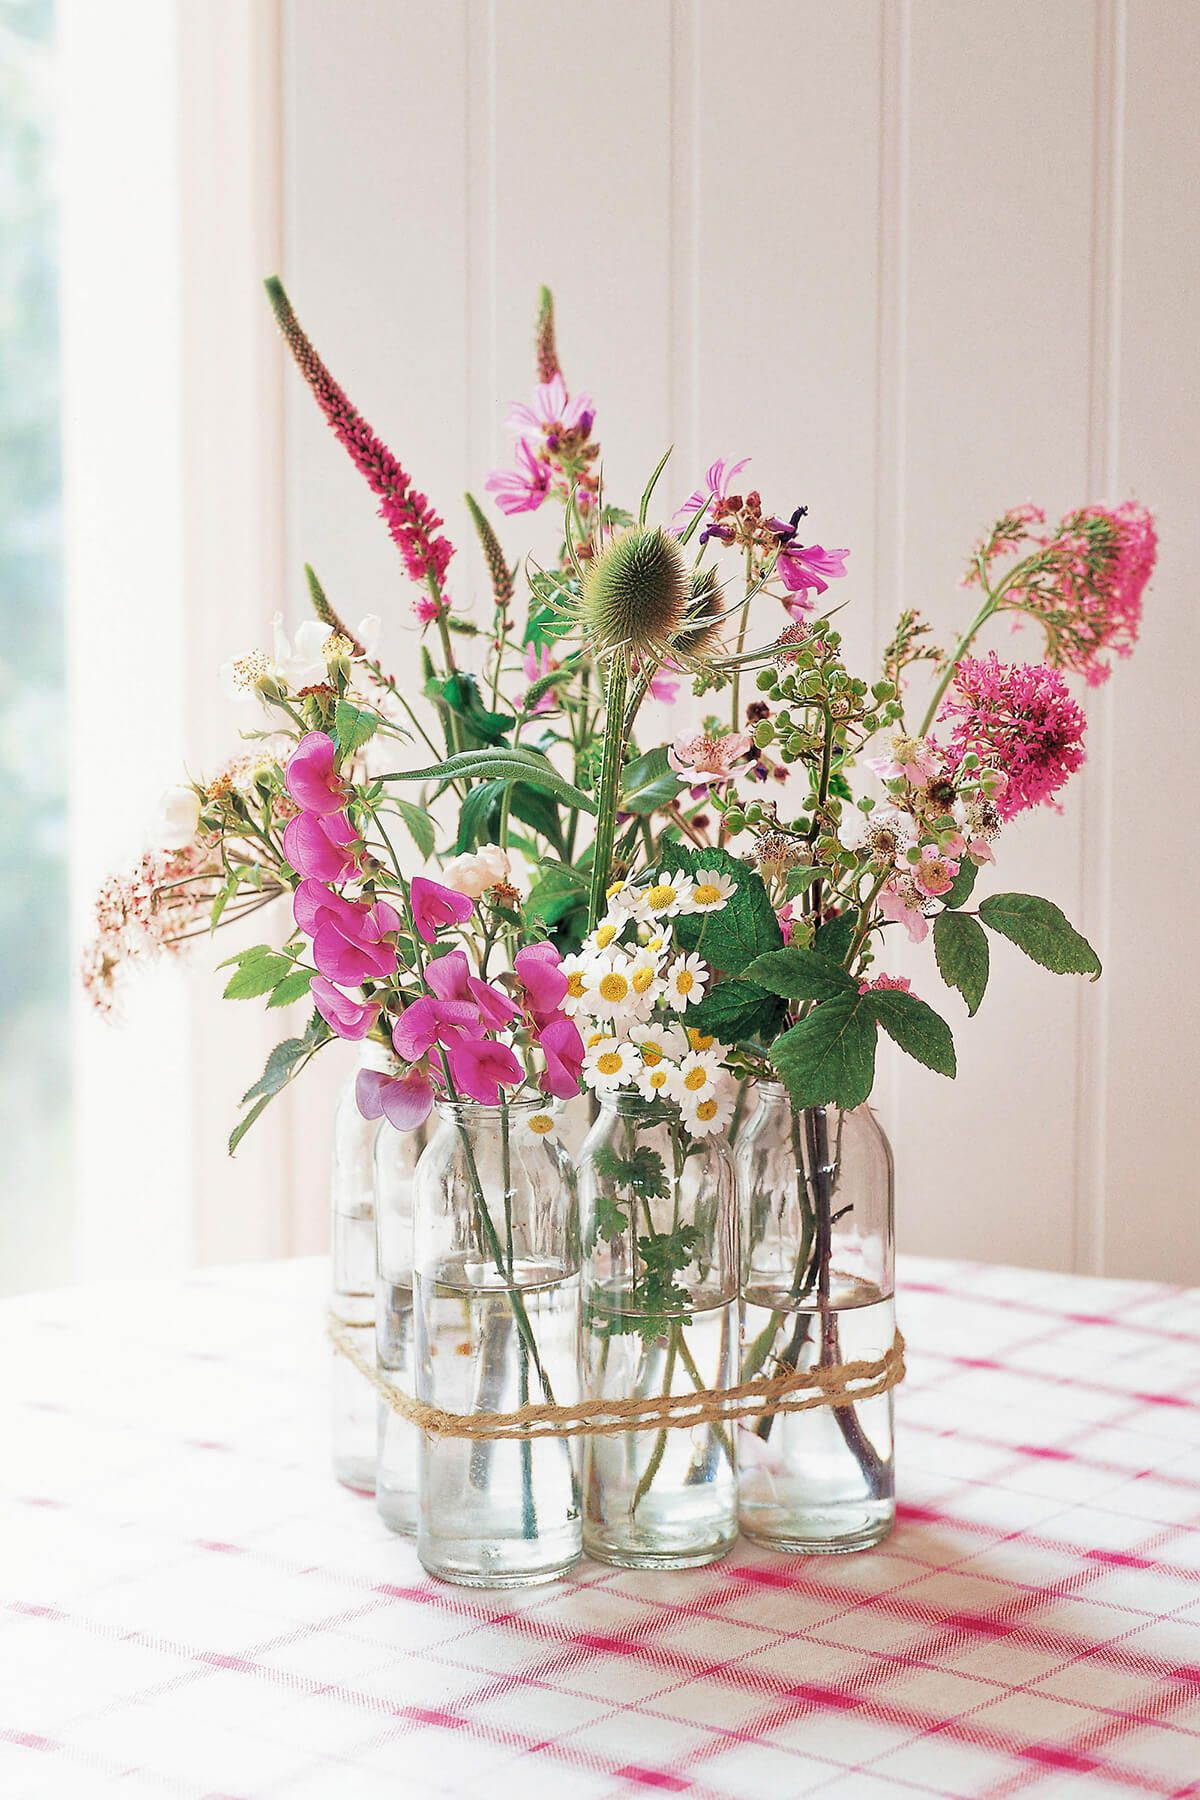 10 Popular Milk Vases for Centerpieces 2024 free download milk vases for centerpieces of 36 flower arrangement ideas to brighten any occasion easter in entwined collection of wildflower bud bases